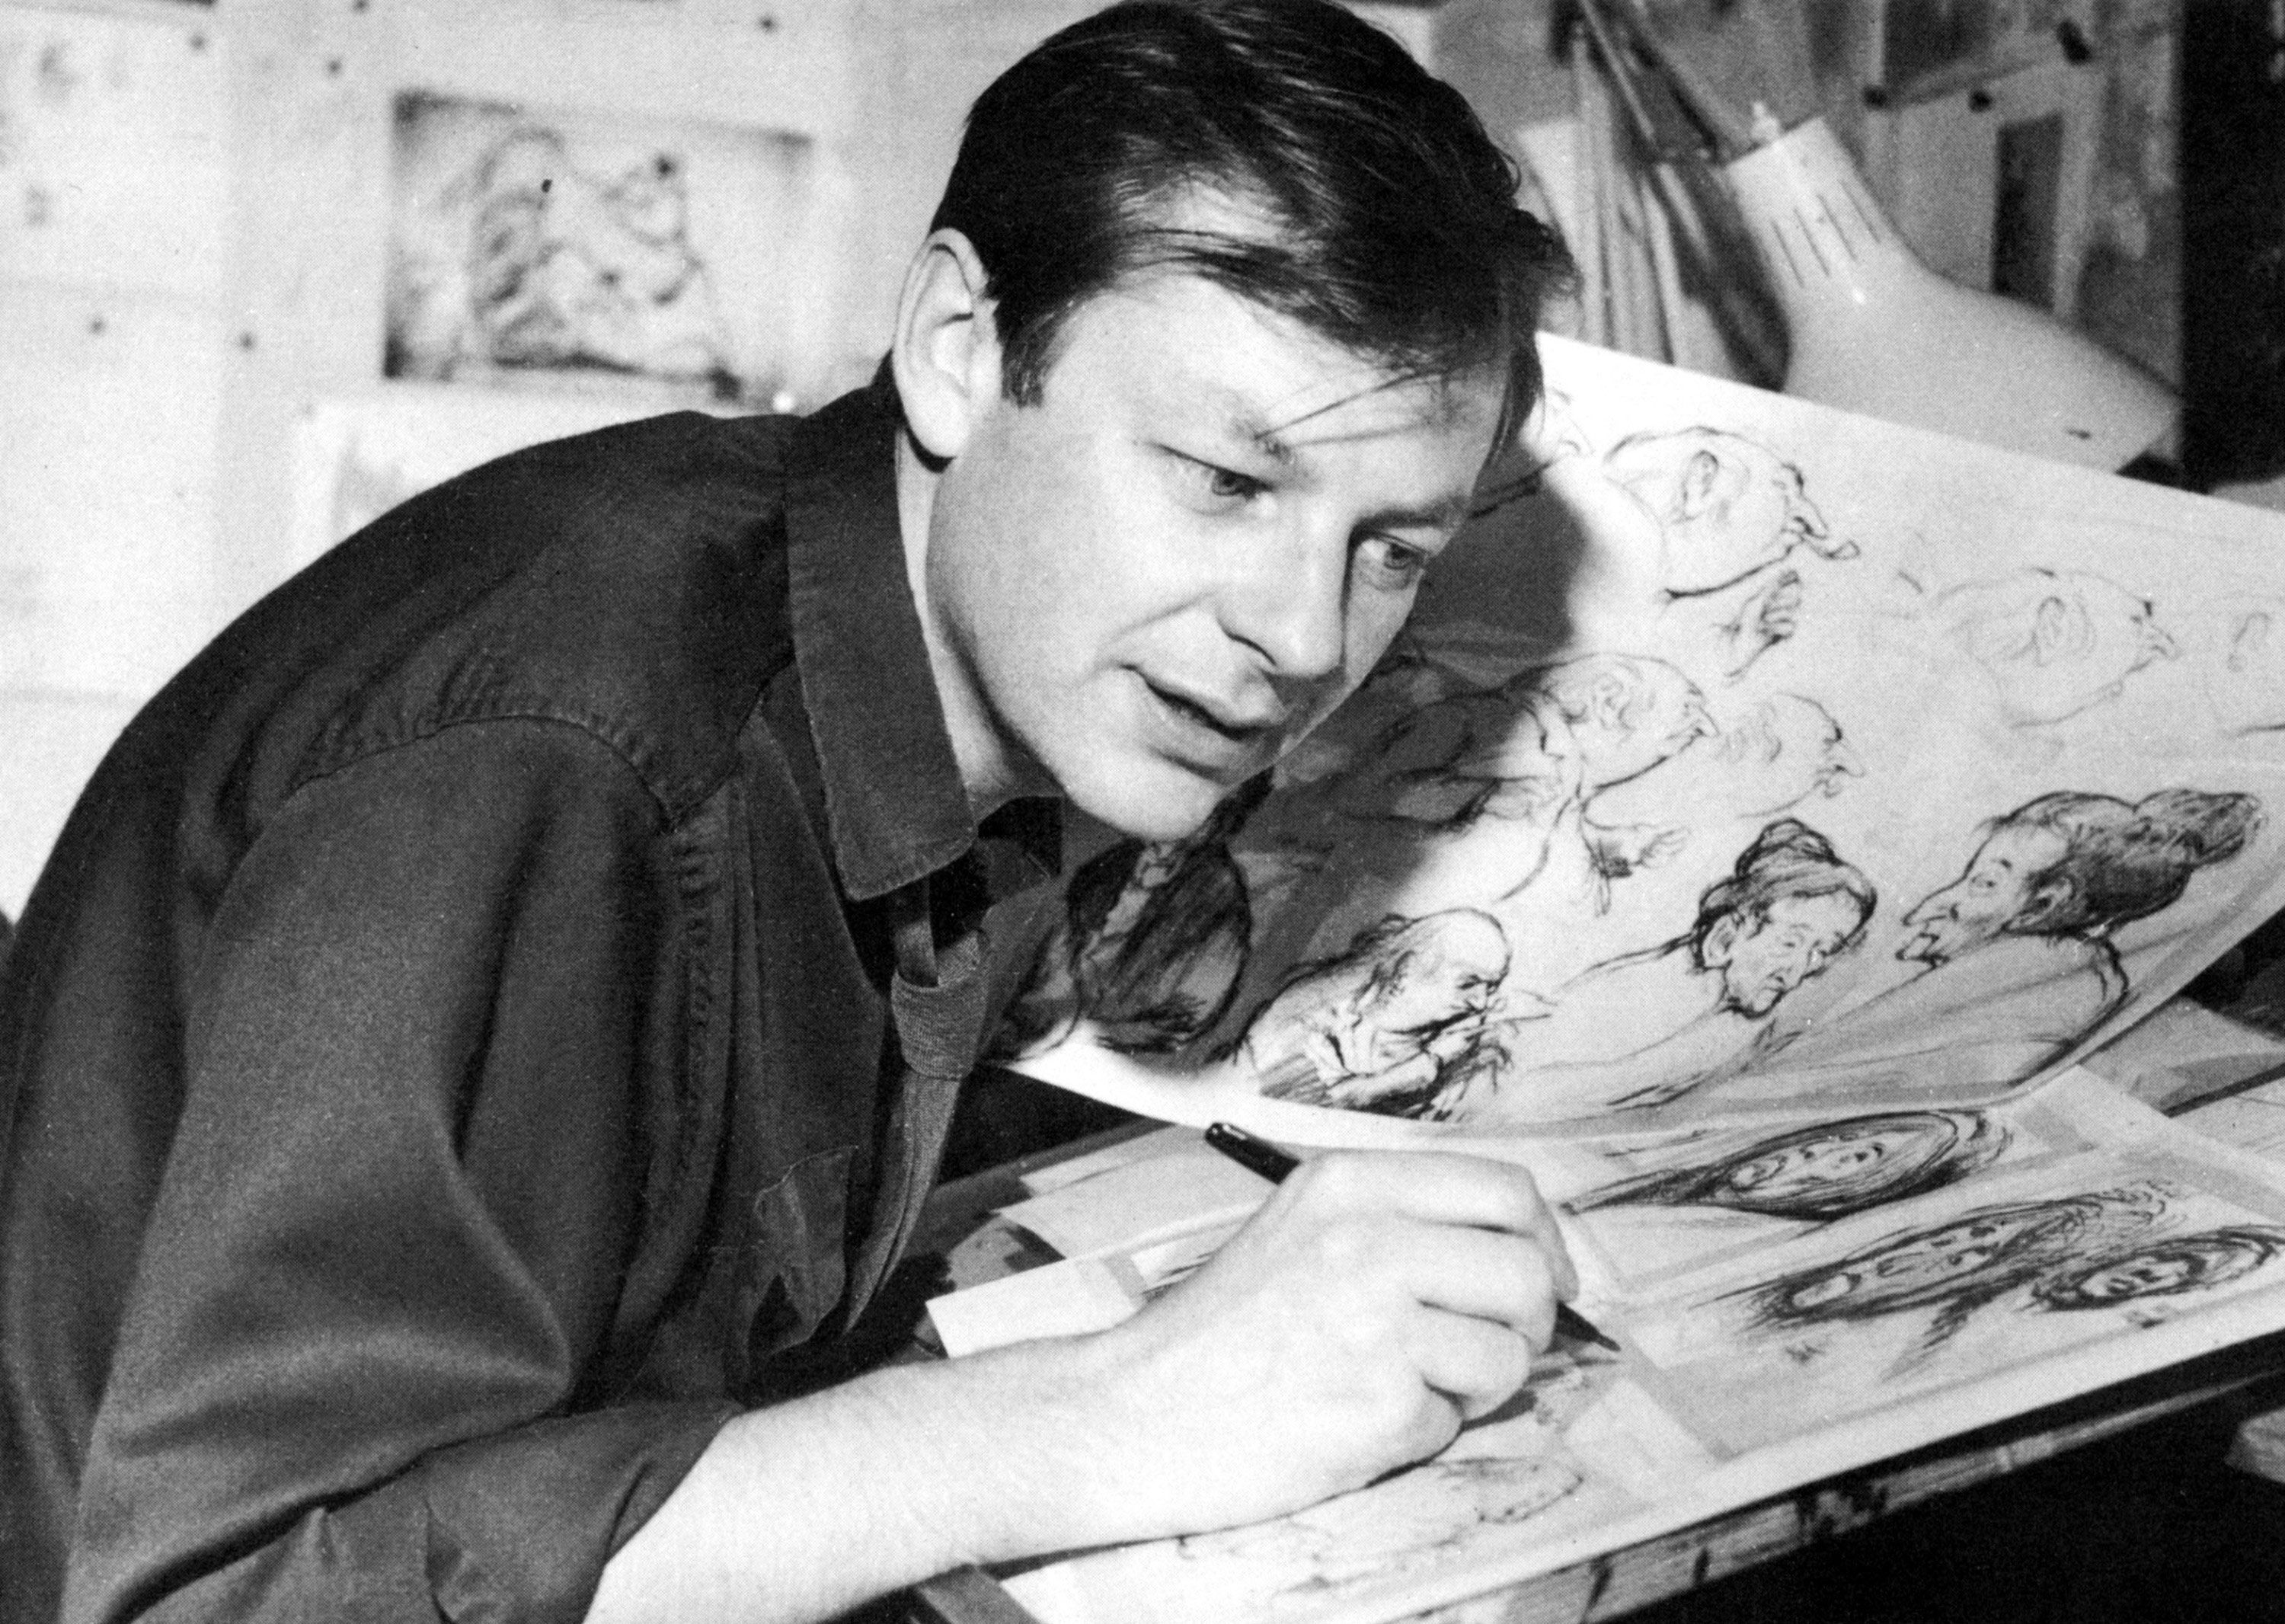 Richard Williams, 'Roger Rabbit' and 'Pink Panther' animator, dead at 86 |  CNN